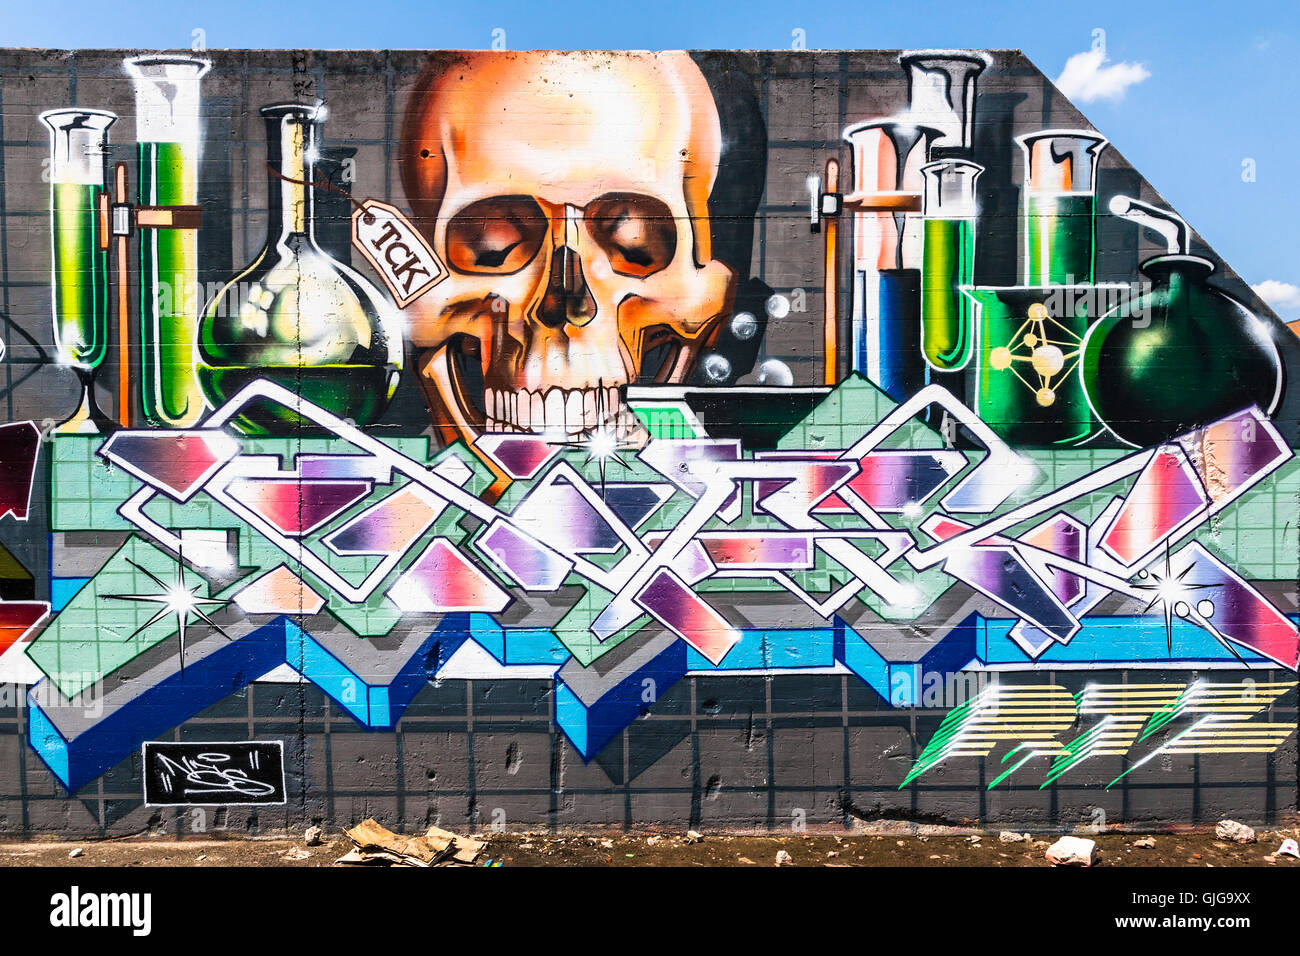 Graffiti Skull and test tubes sprayed on the remnant of an old wall, Friedrichshain, Berlin, Germany. Stock Photo